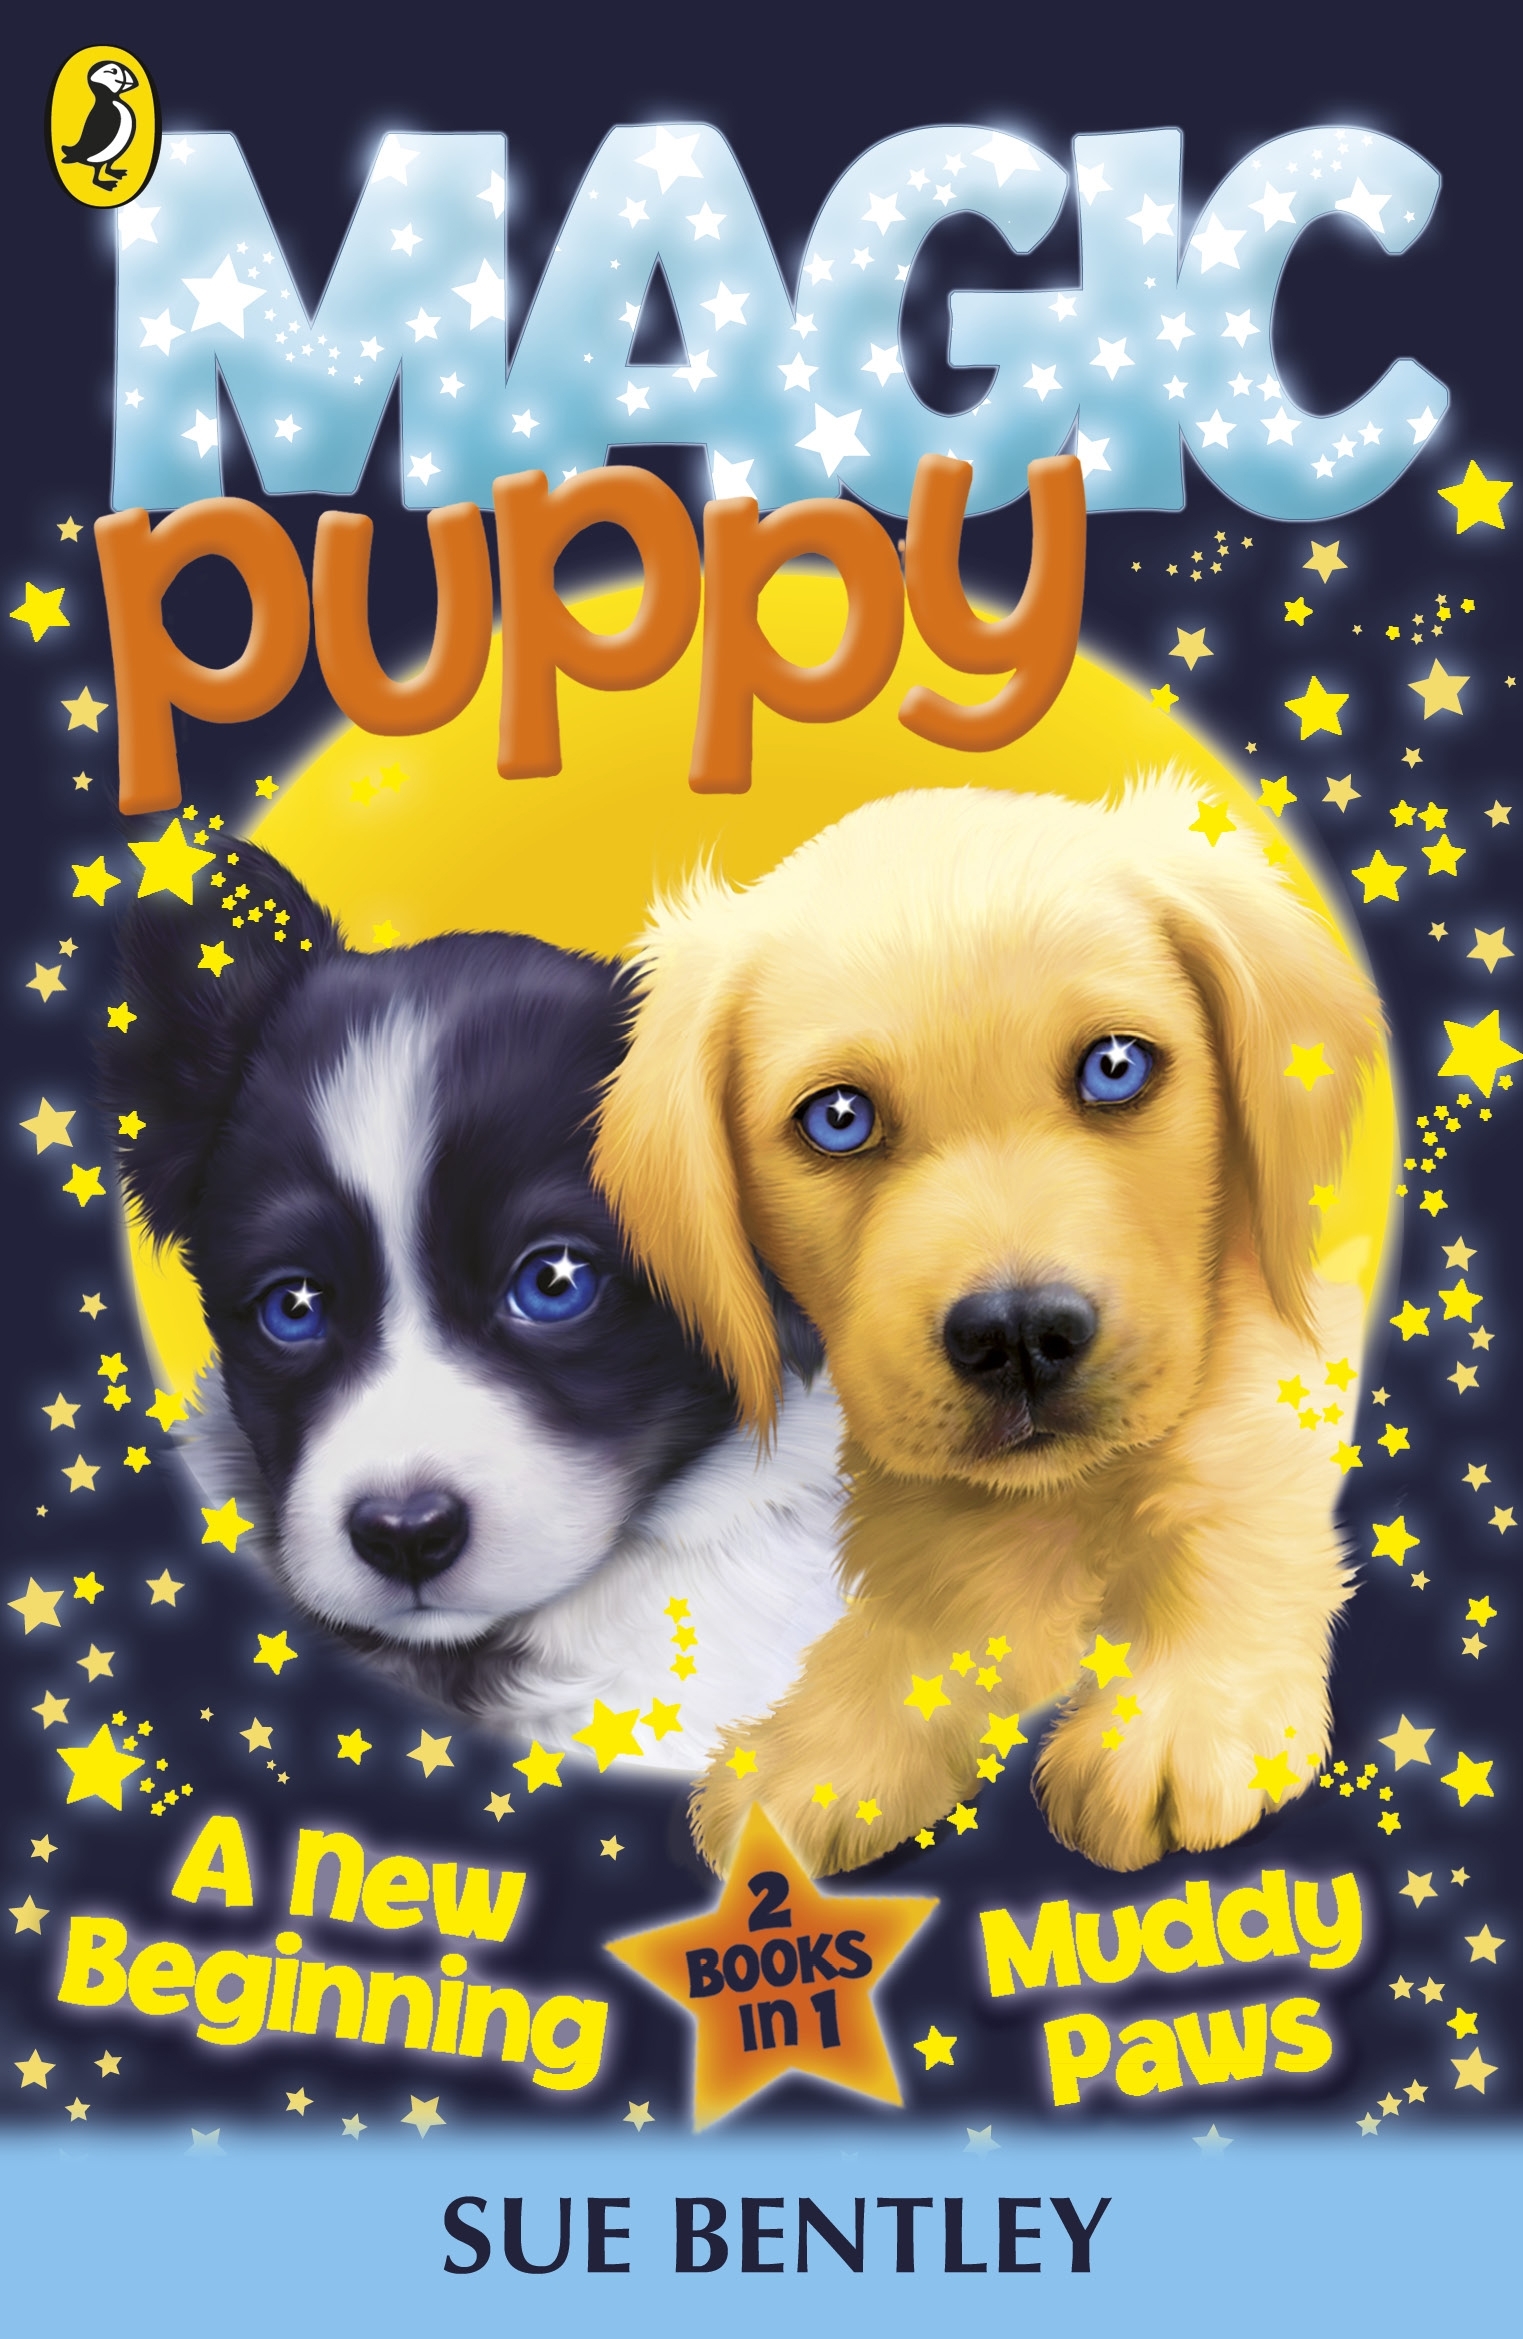 Magic Puppy A New Beginning and Muddy Paws by Sue Bentley